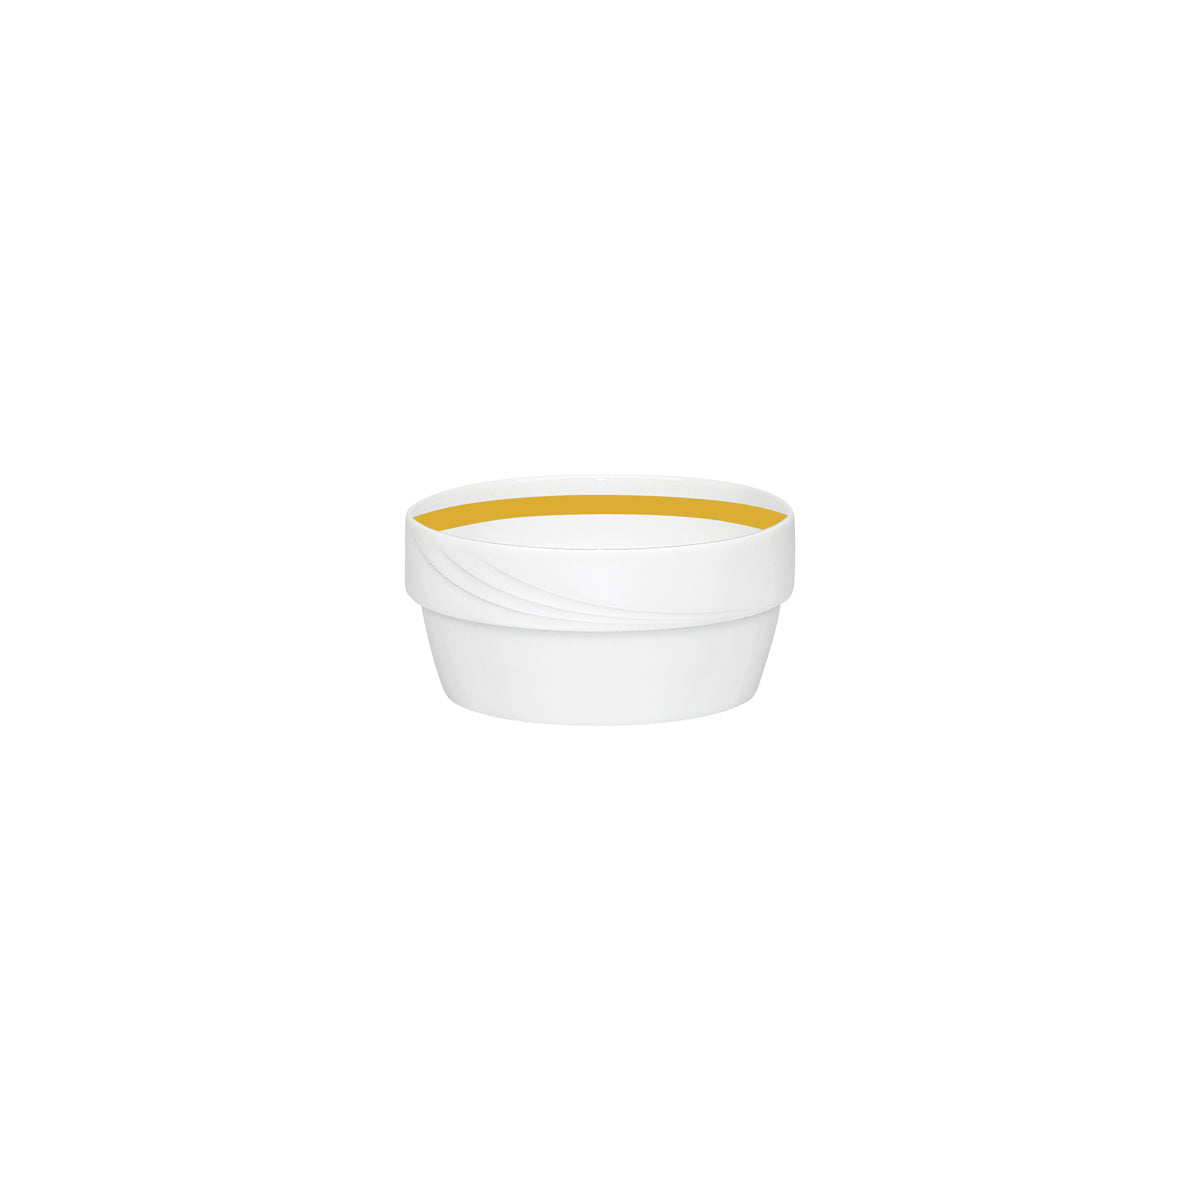 SH9185745/62981 Donna Senior Decor Stackable Round Soup Bowl with Yellow Band 125x59mm / 470ml Tomkin Australia Hospitality Supplies